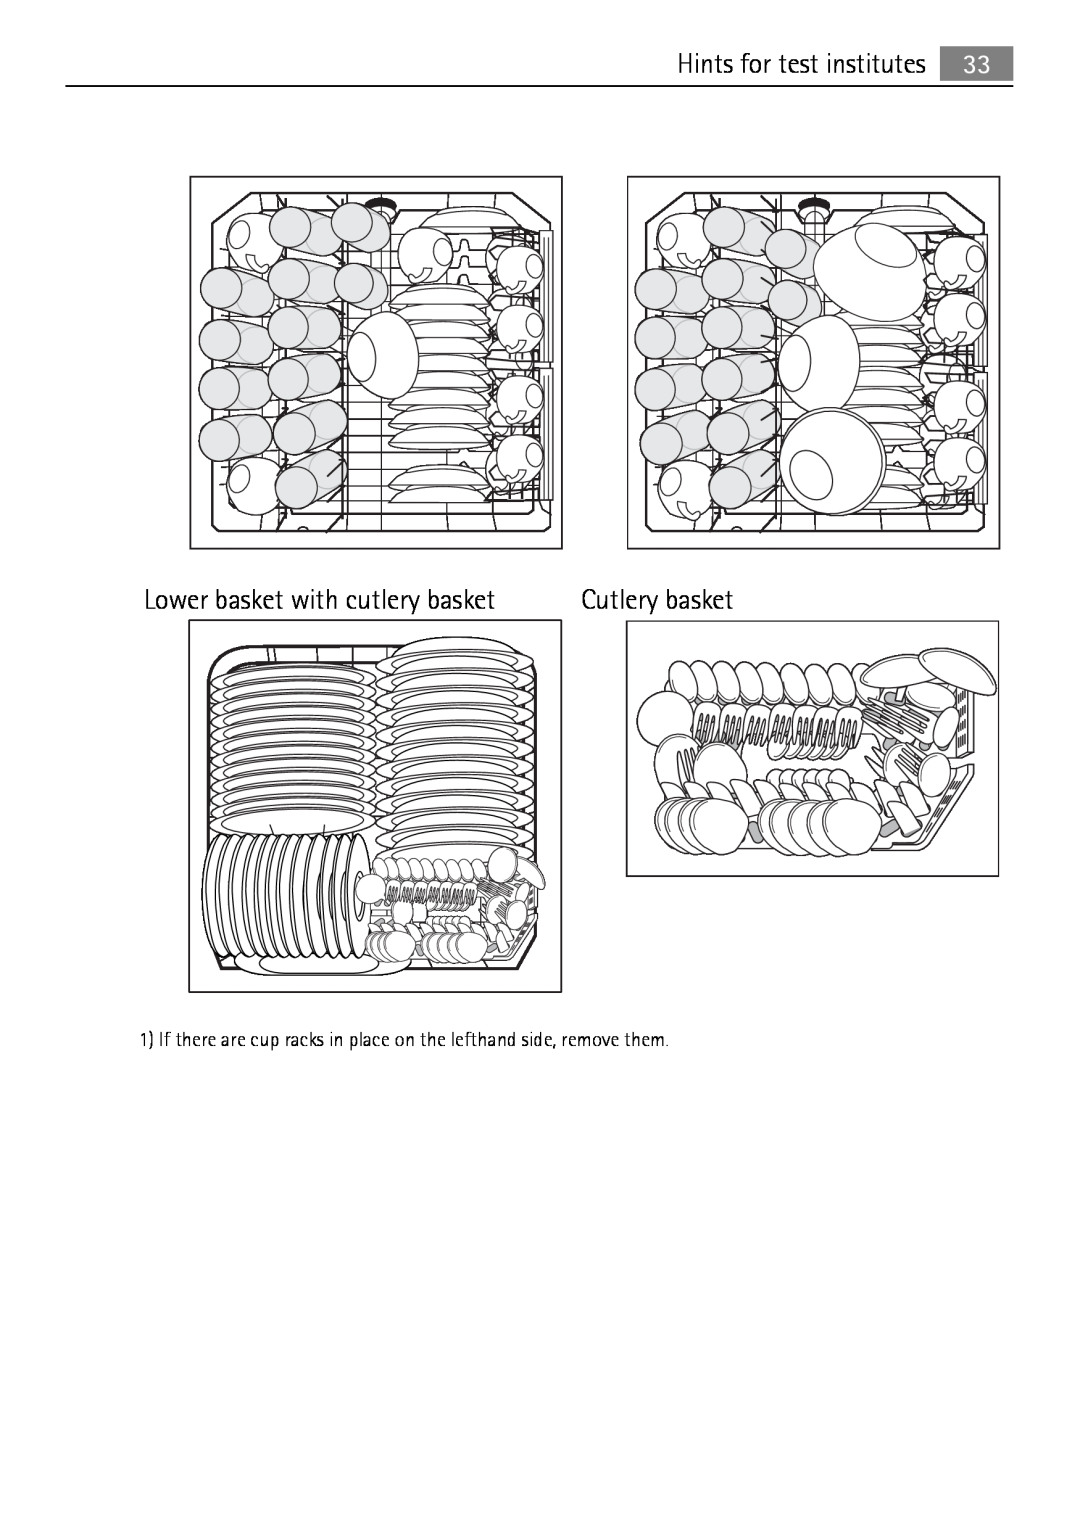 Electrolux 65011 VI user manual Lower basket with cutlery basket, Cutlery basket, Hints for test institutes 